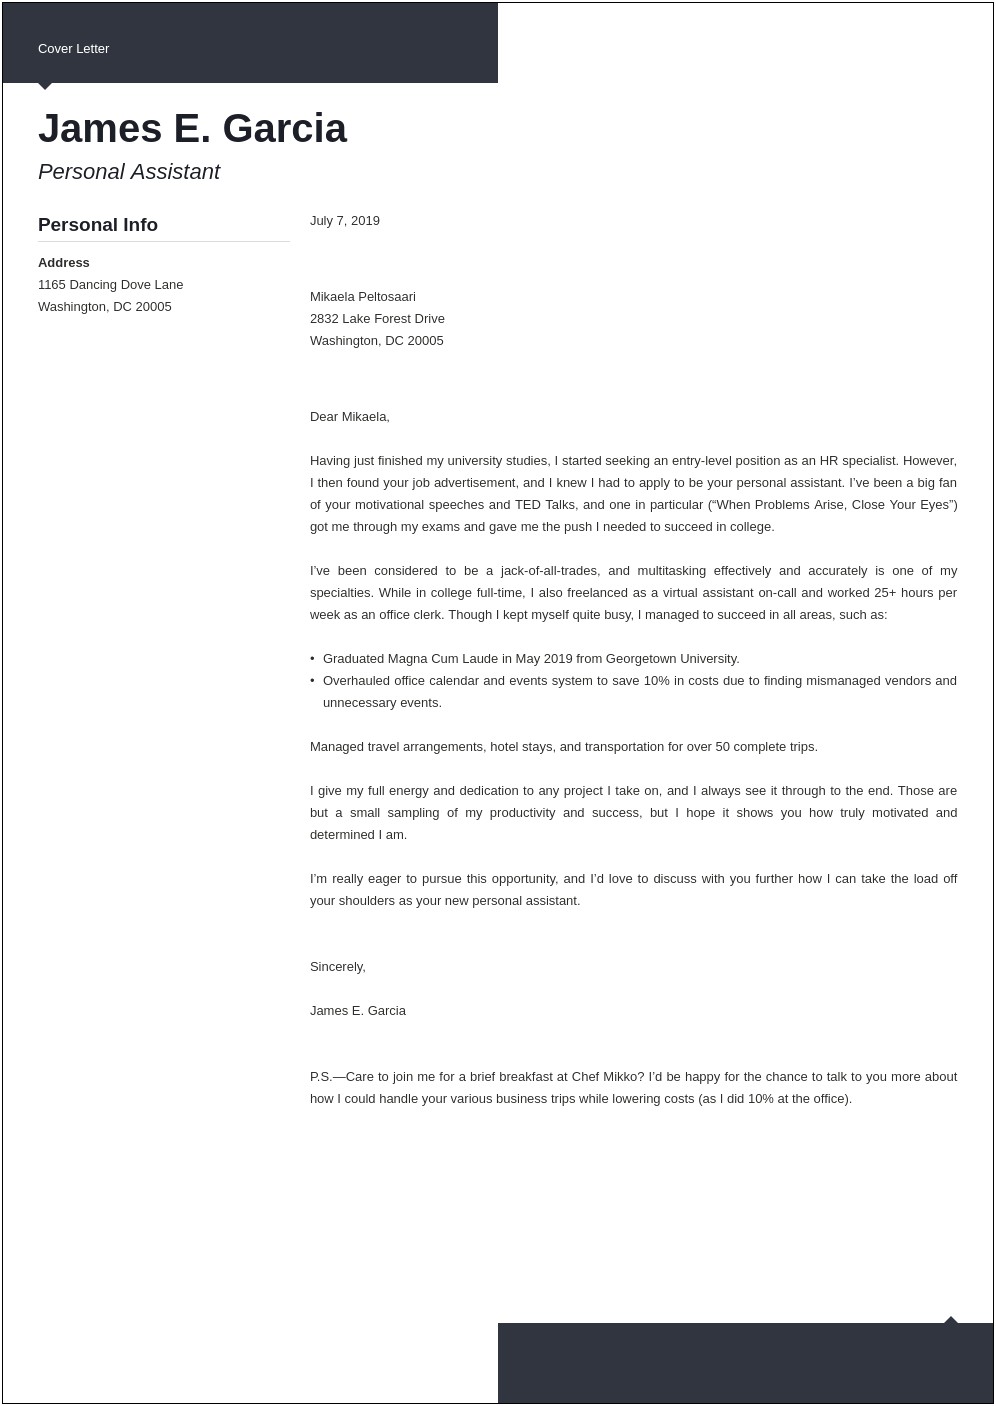 Attach Cover Letter Template To Resume